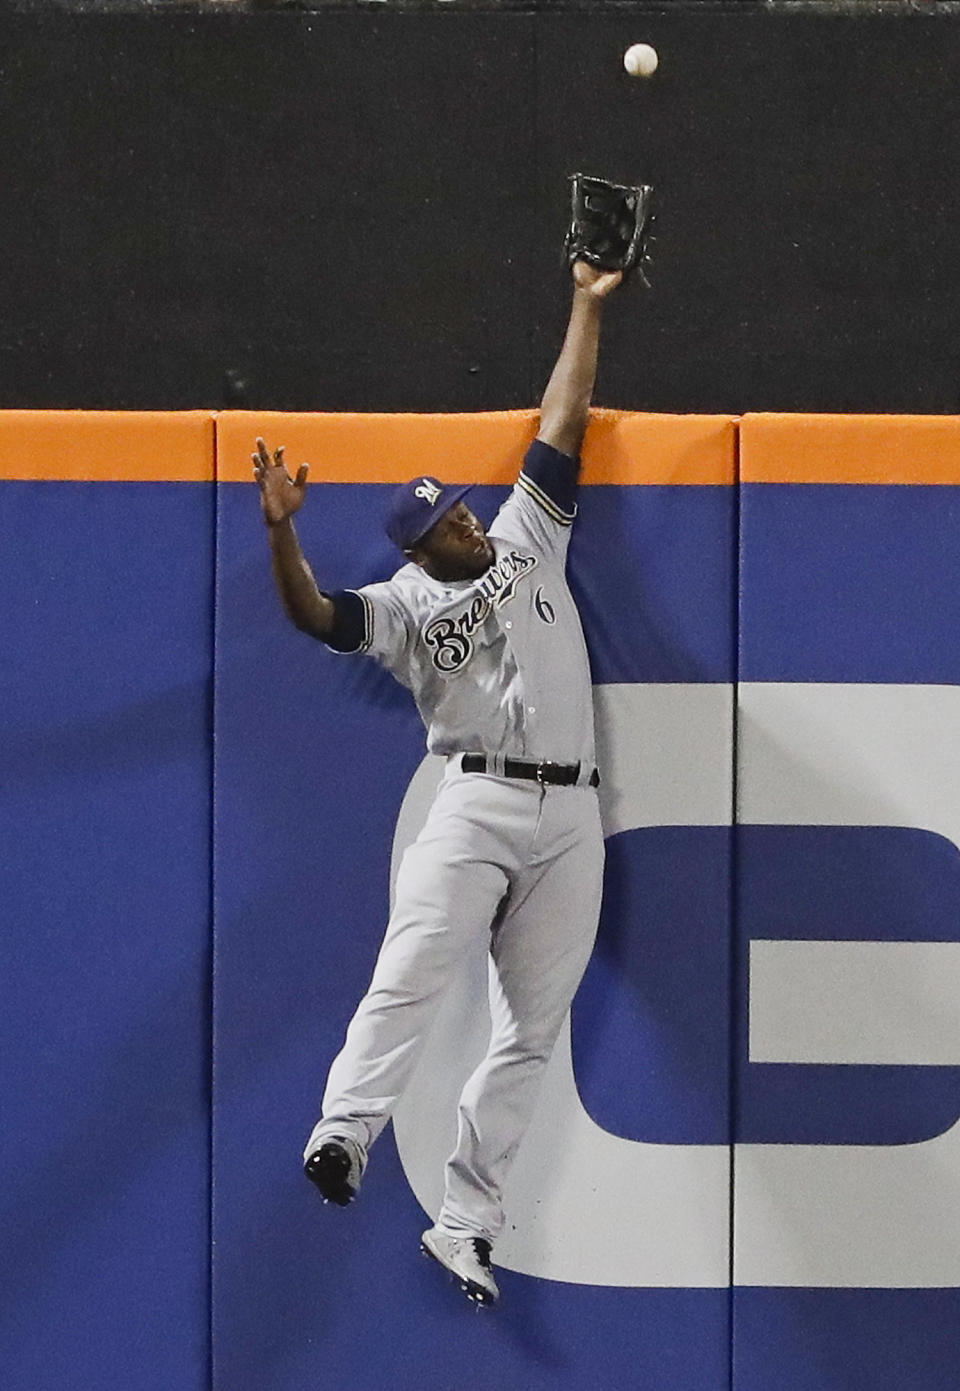 Milwaukee Brewers center fielder Lorenzo Cain (6) catches a ball hit by New York Mets' Todd Frazier for an out during the second inning of a baseball game Friday, April 26, 2019, in New York. (AP Photo/Frank Franklin II)